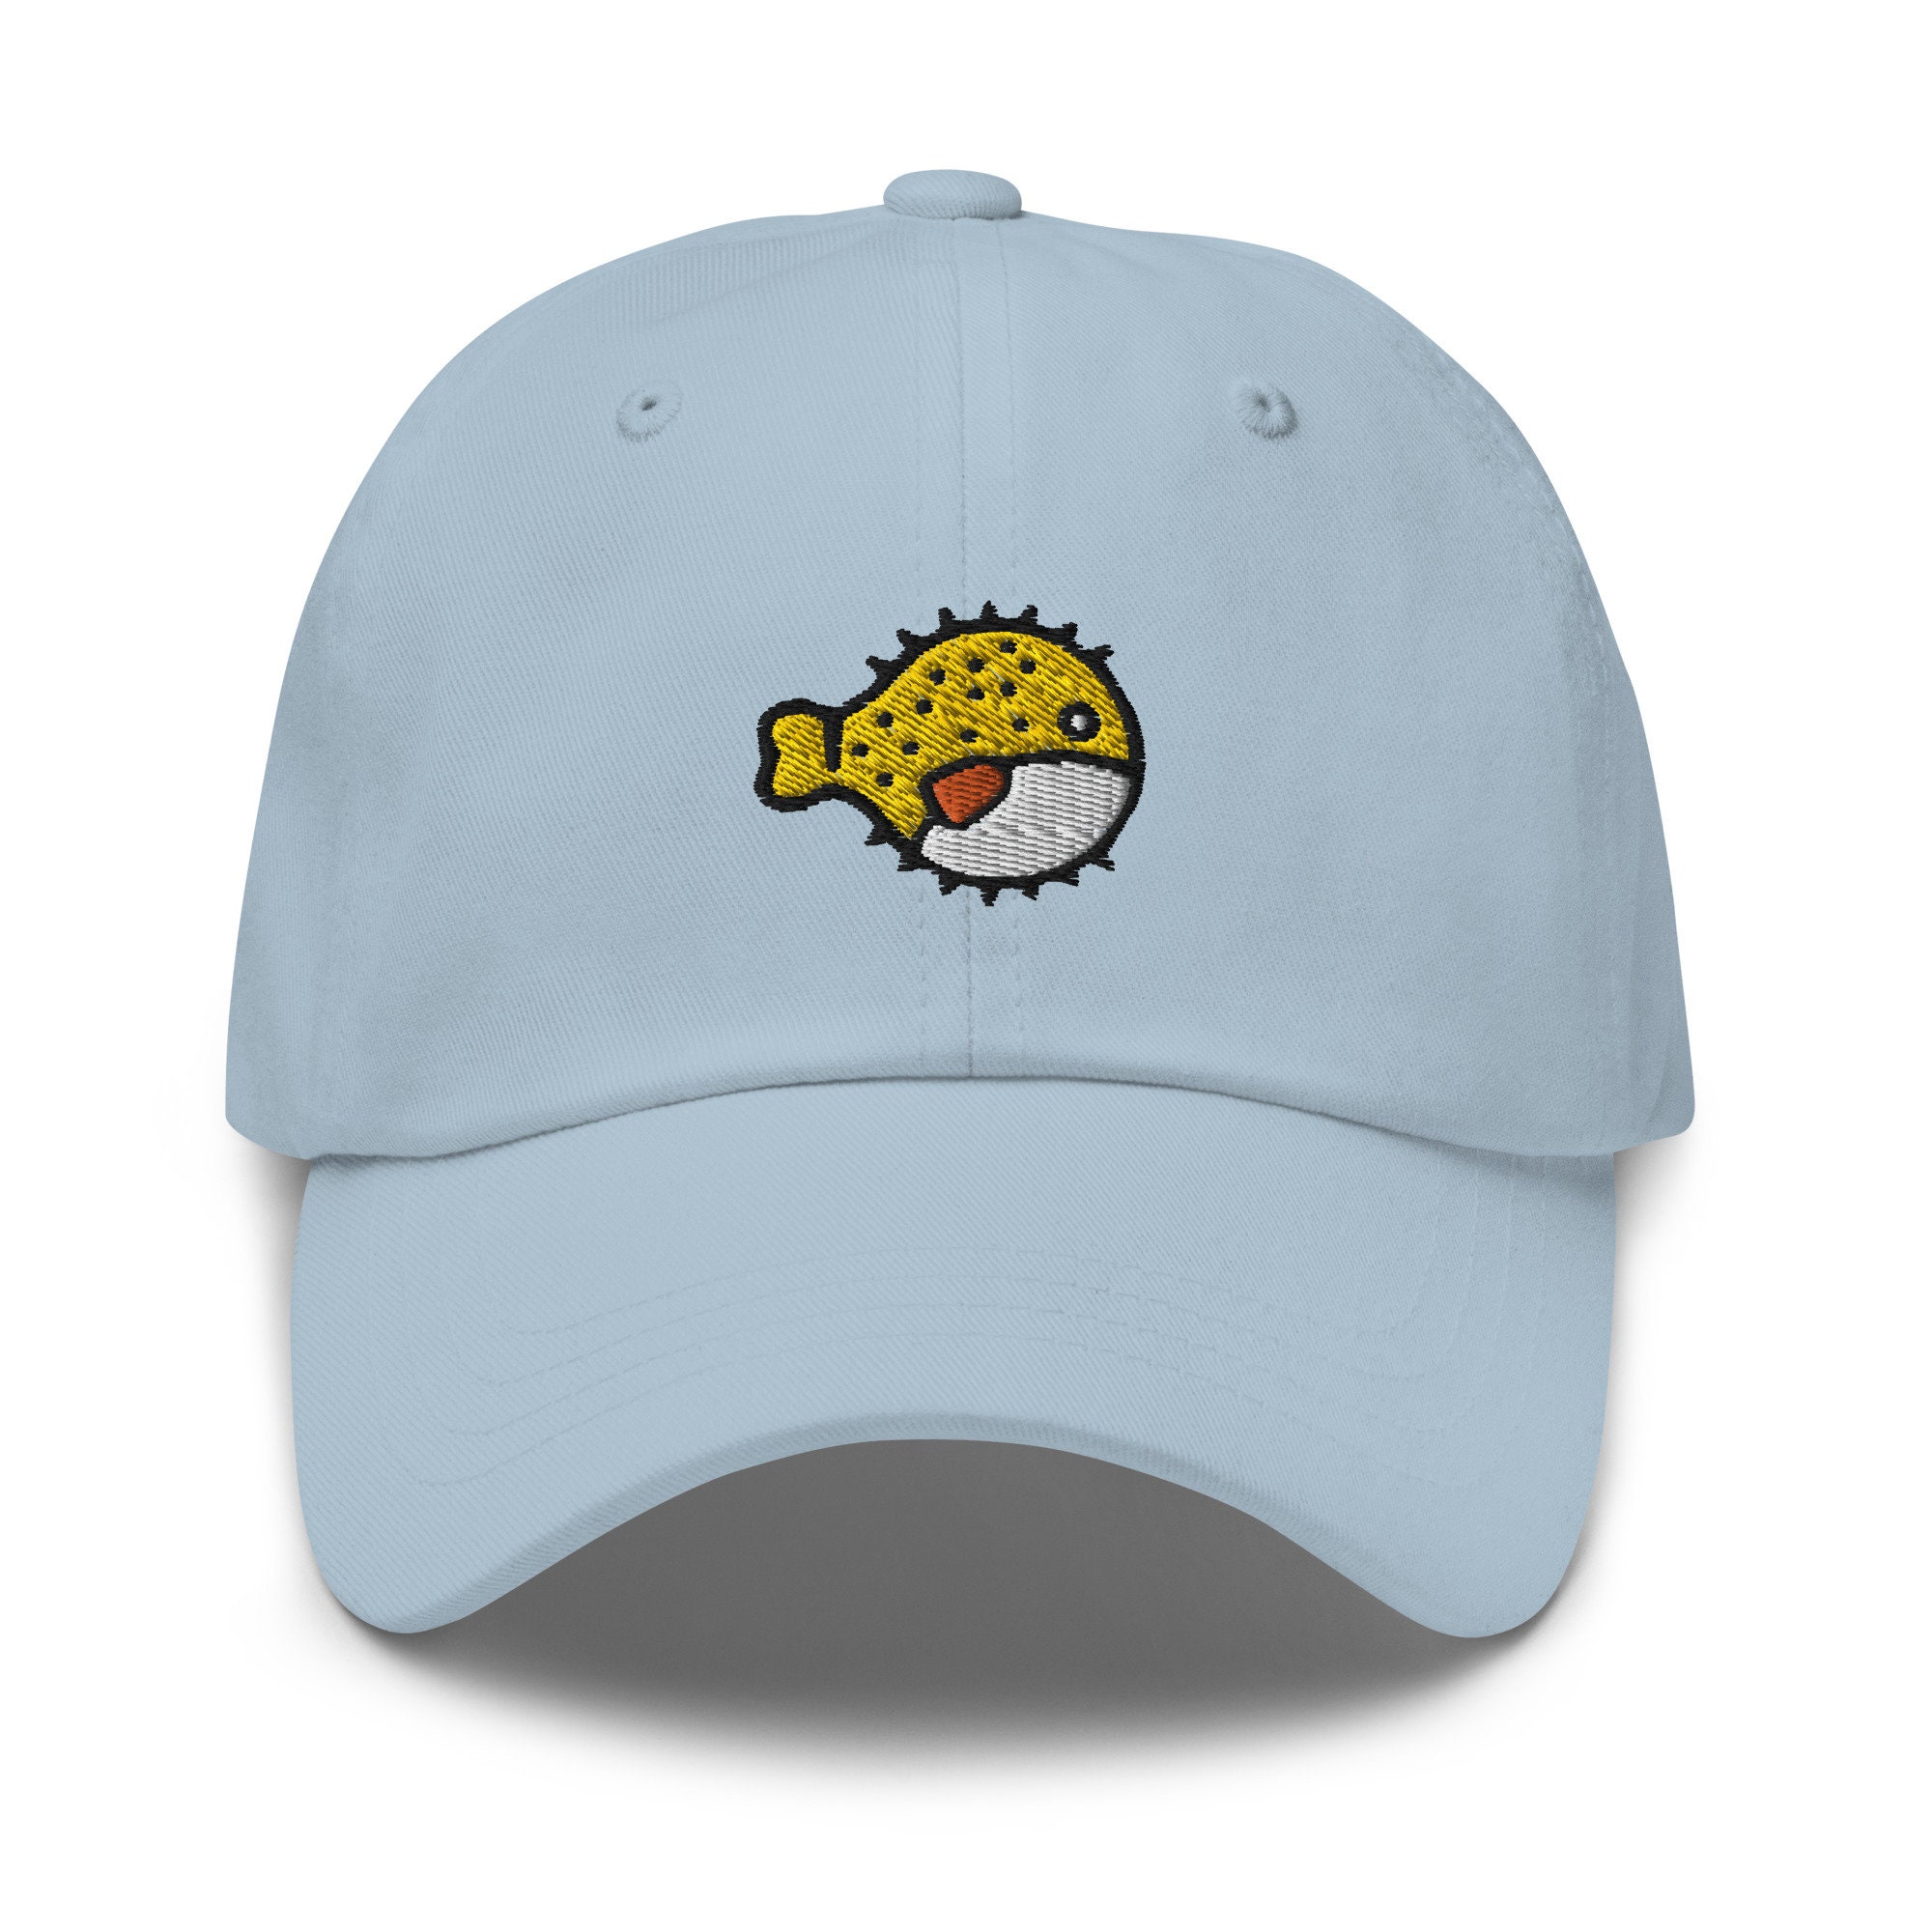 Funny Puffer Fish Dad Hat, Embroidered Sea Creature Baseball Cap